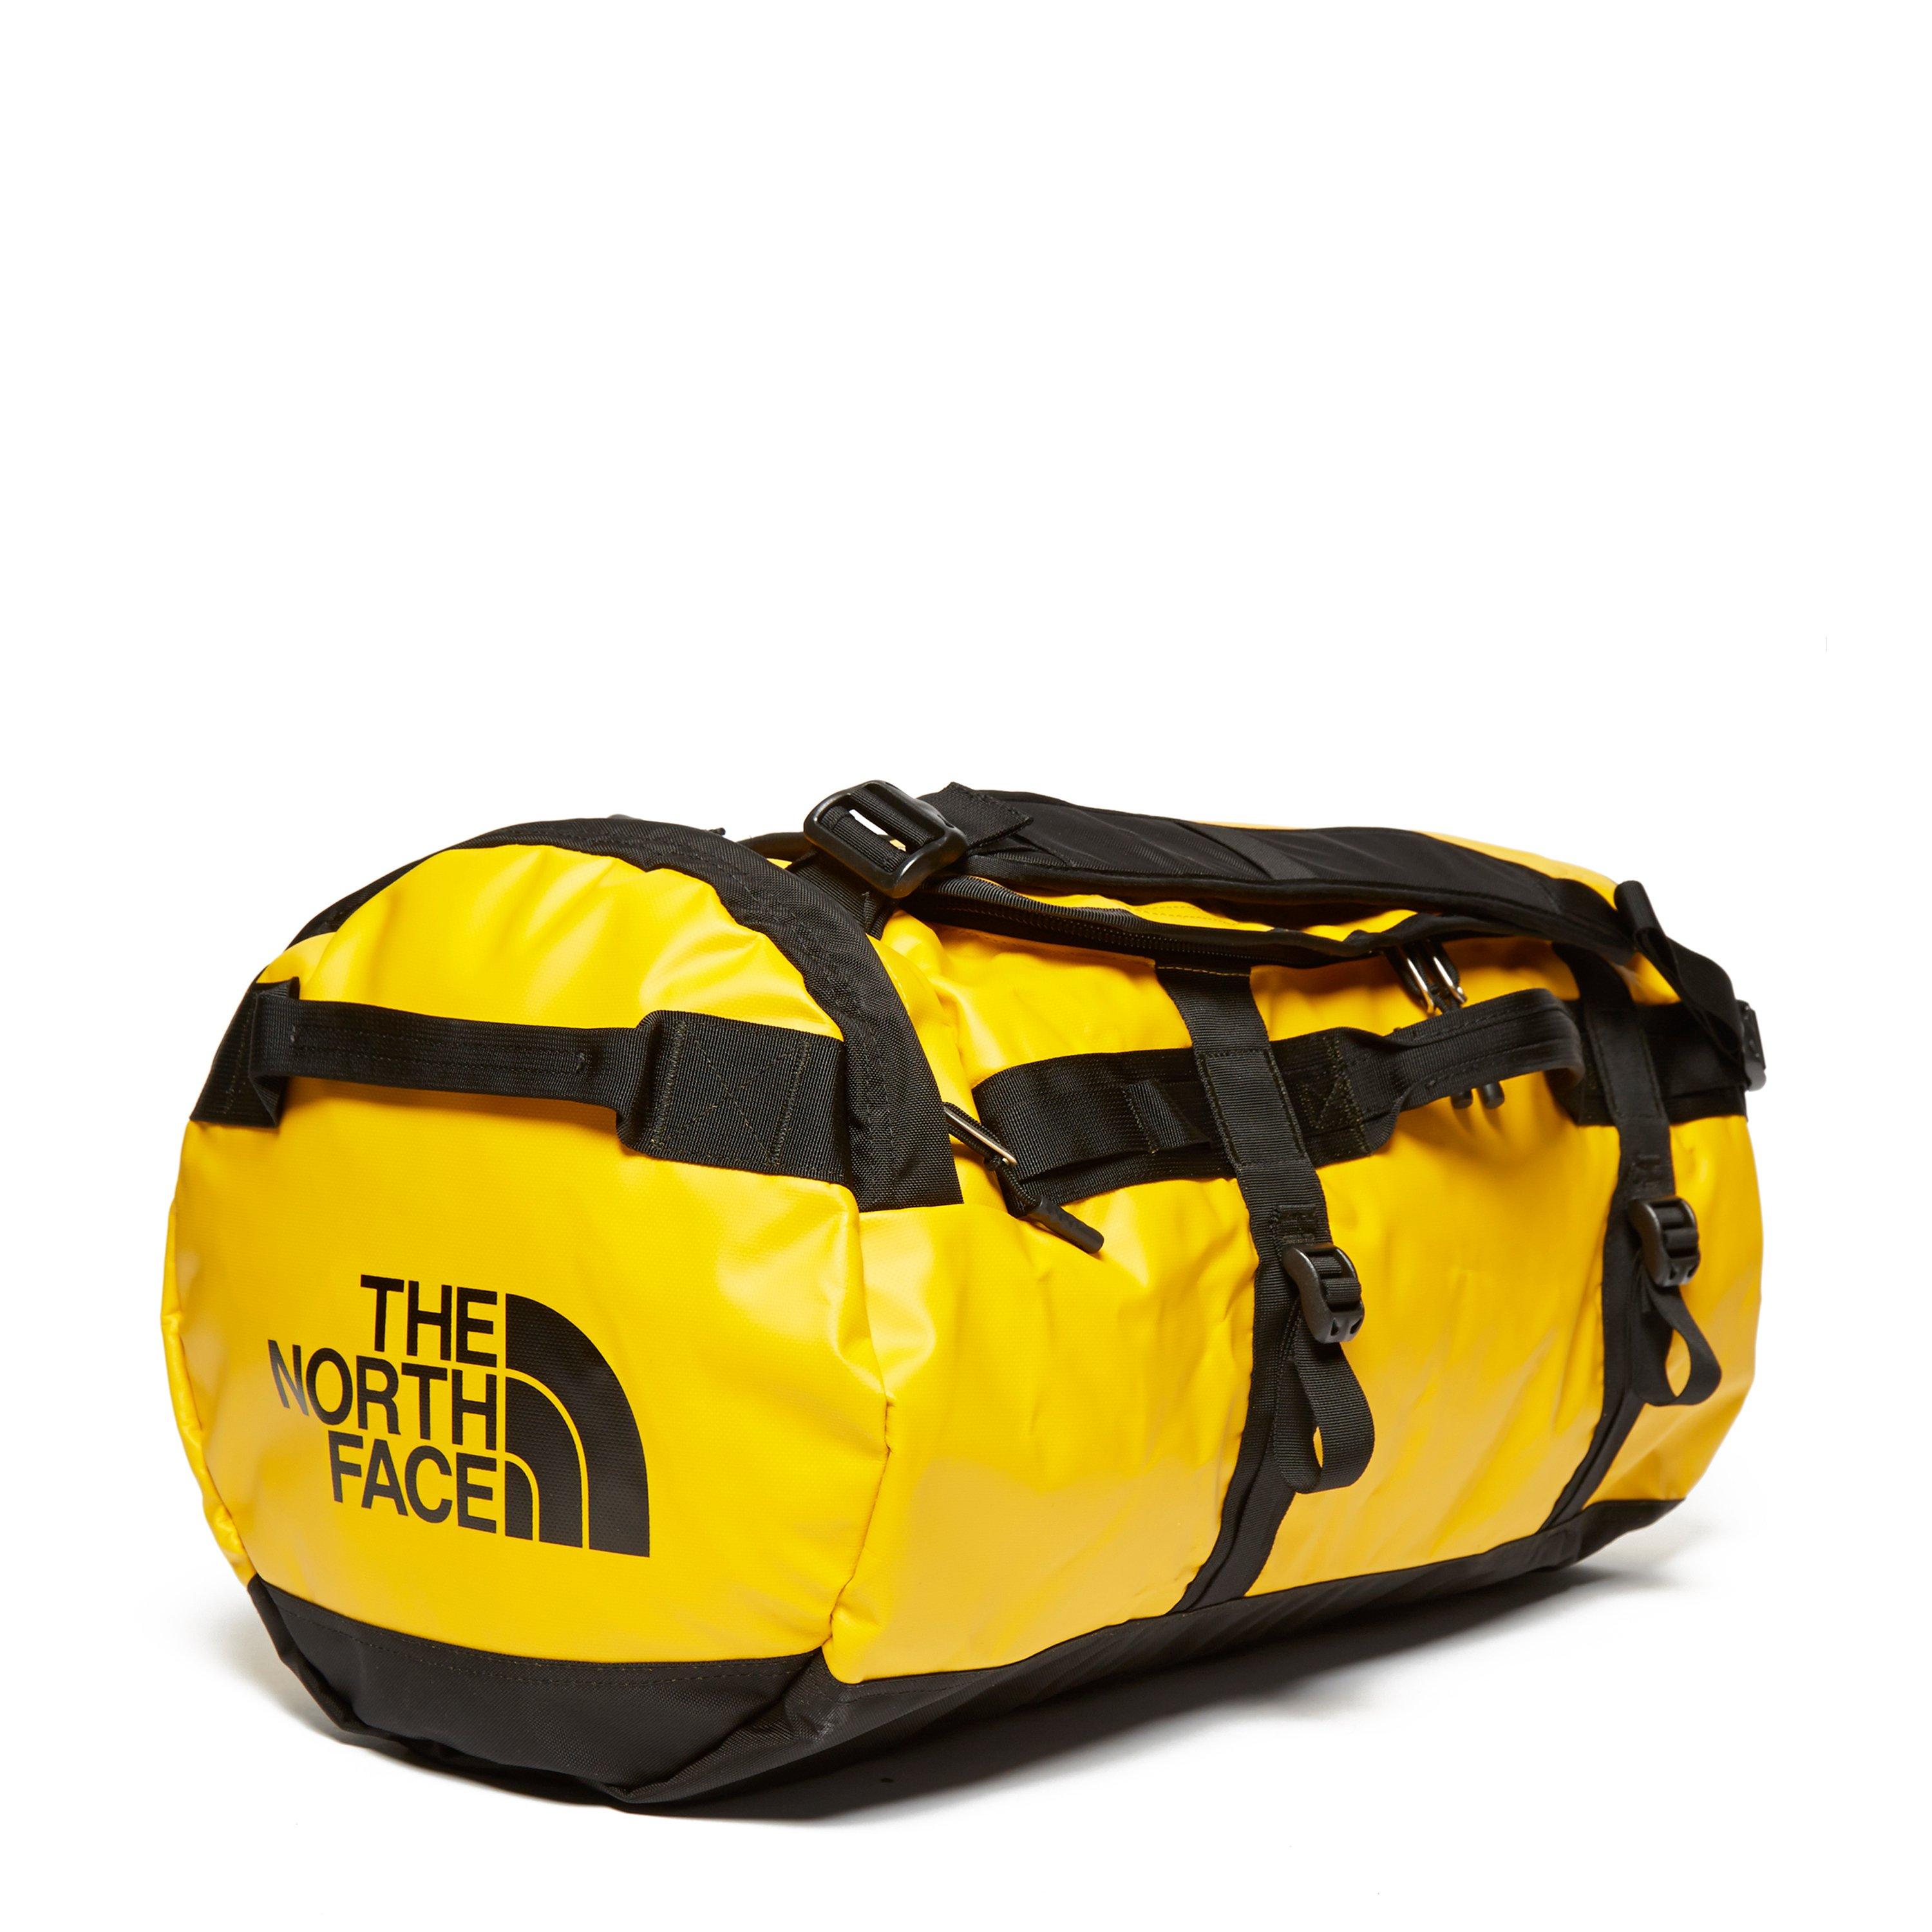 The North Face Duffel Bags | IUCN Water